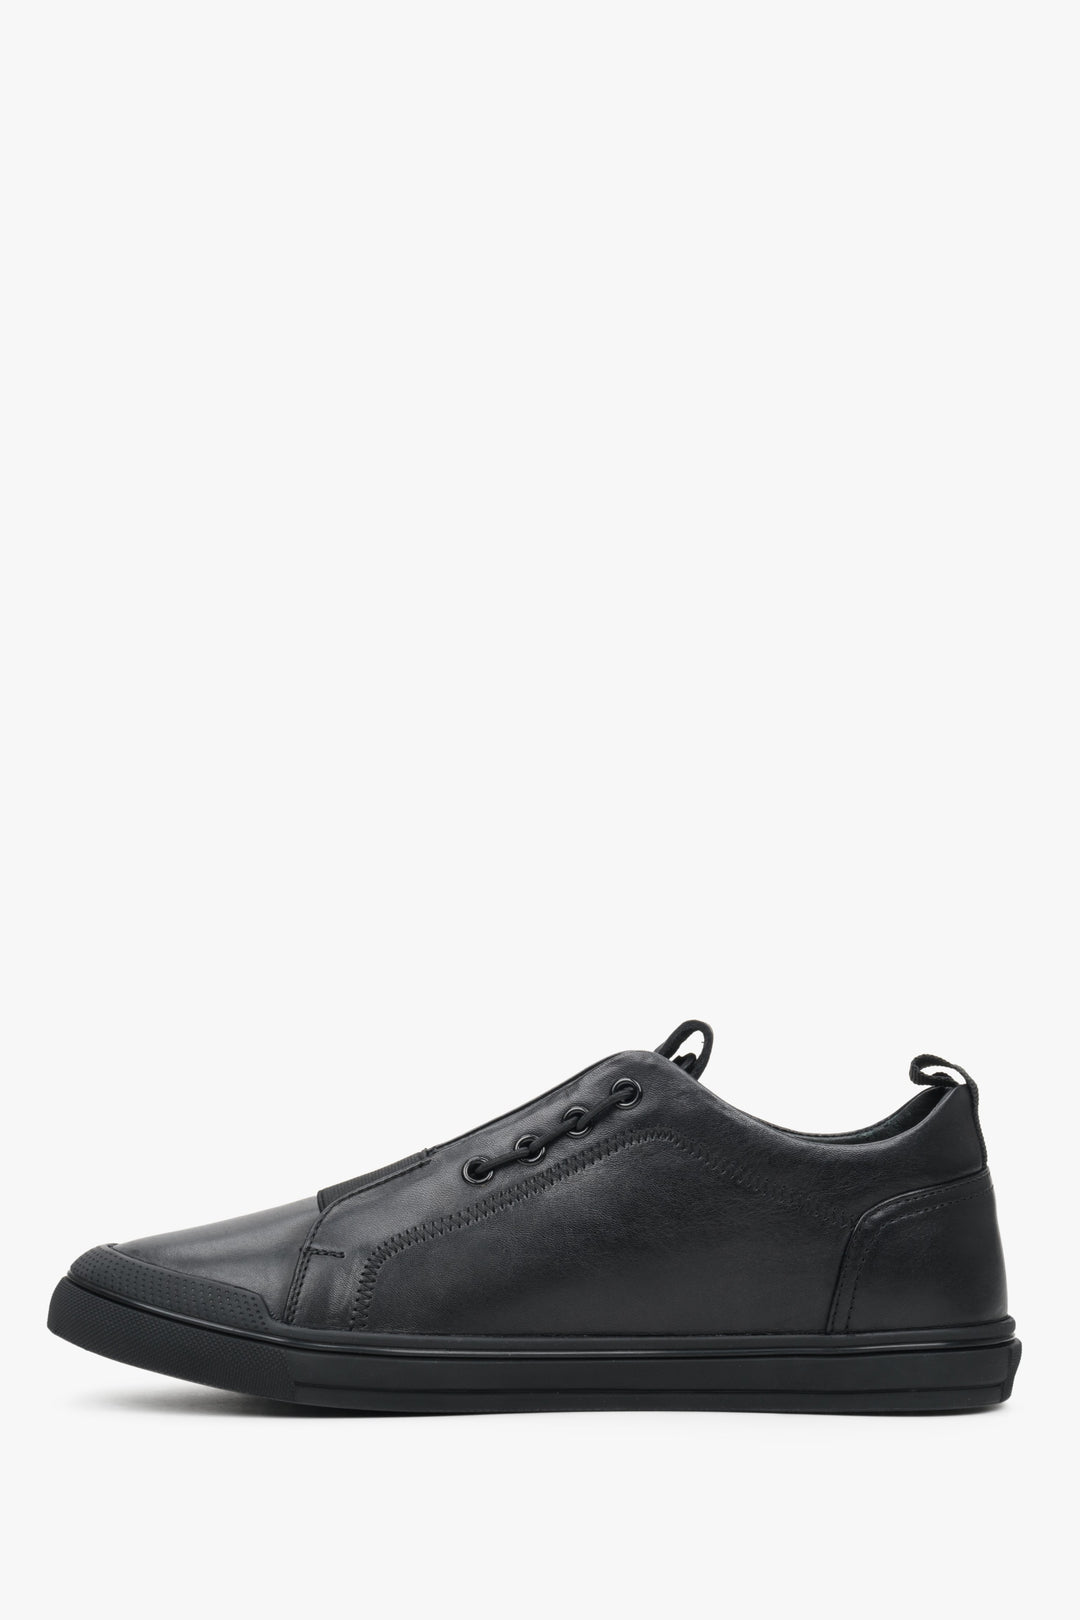 ES 8 men's leather sneakers with a cuff - shoe profile.